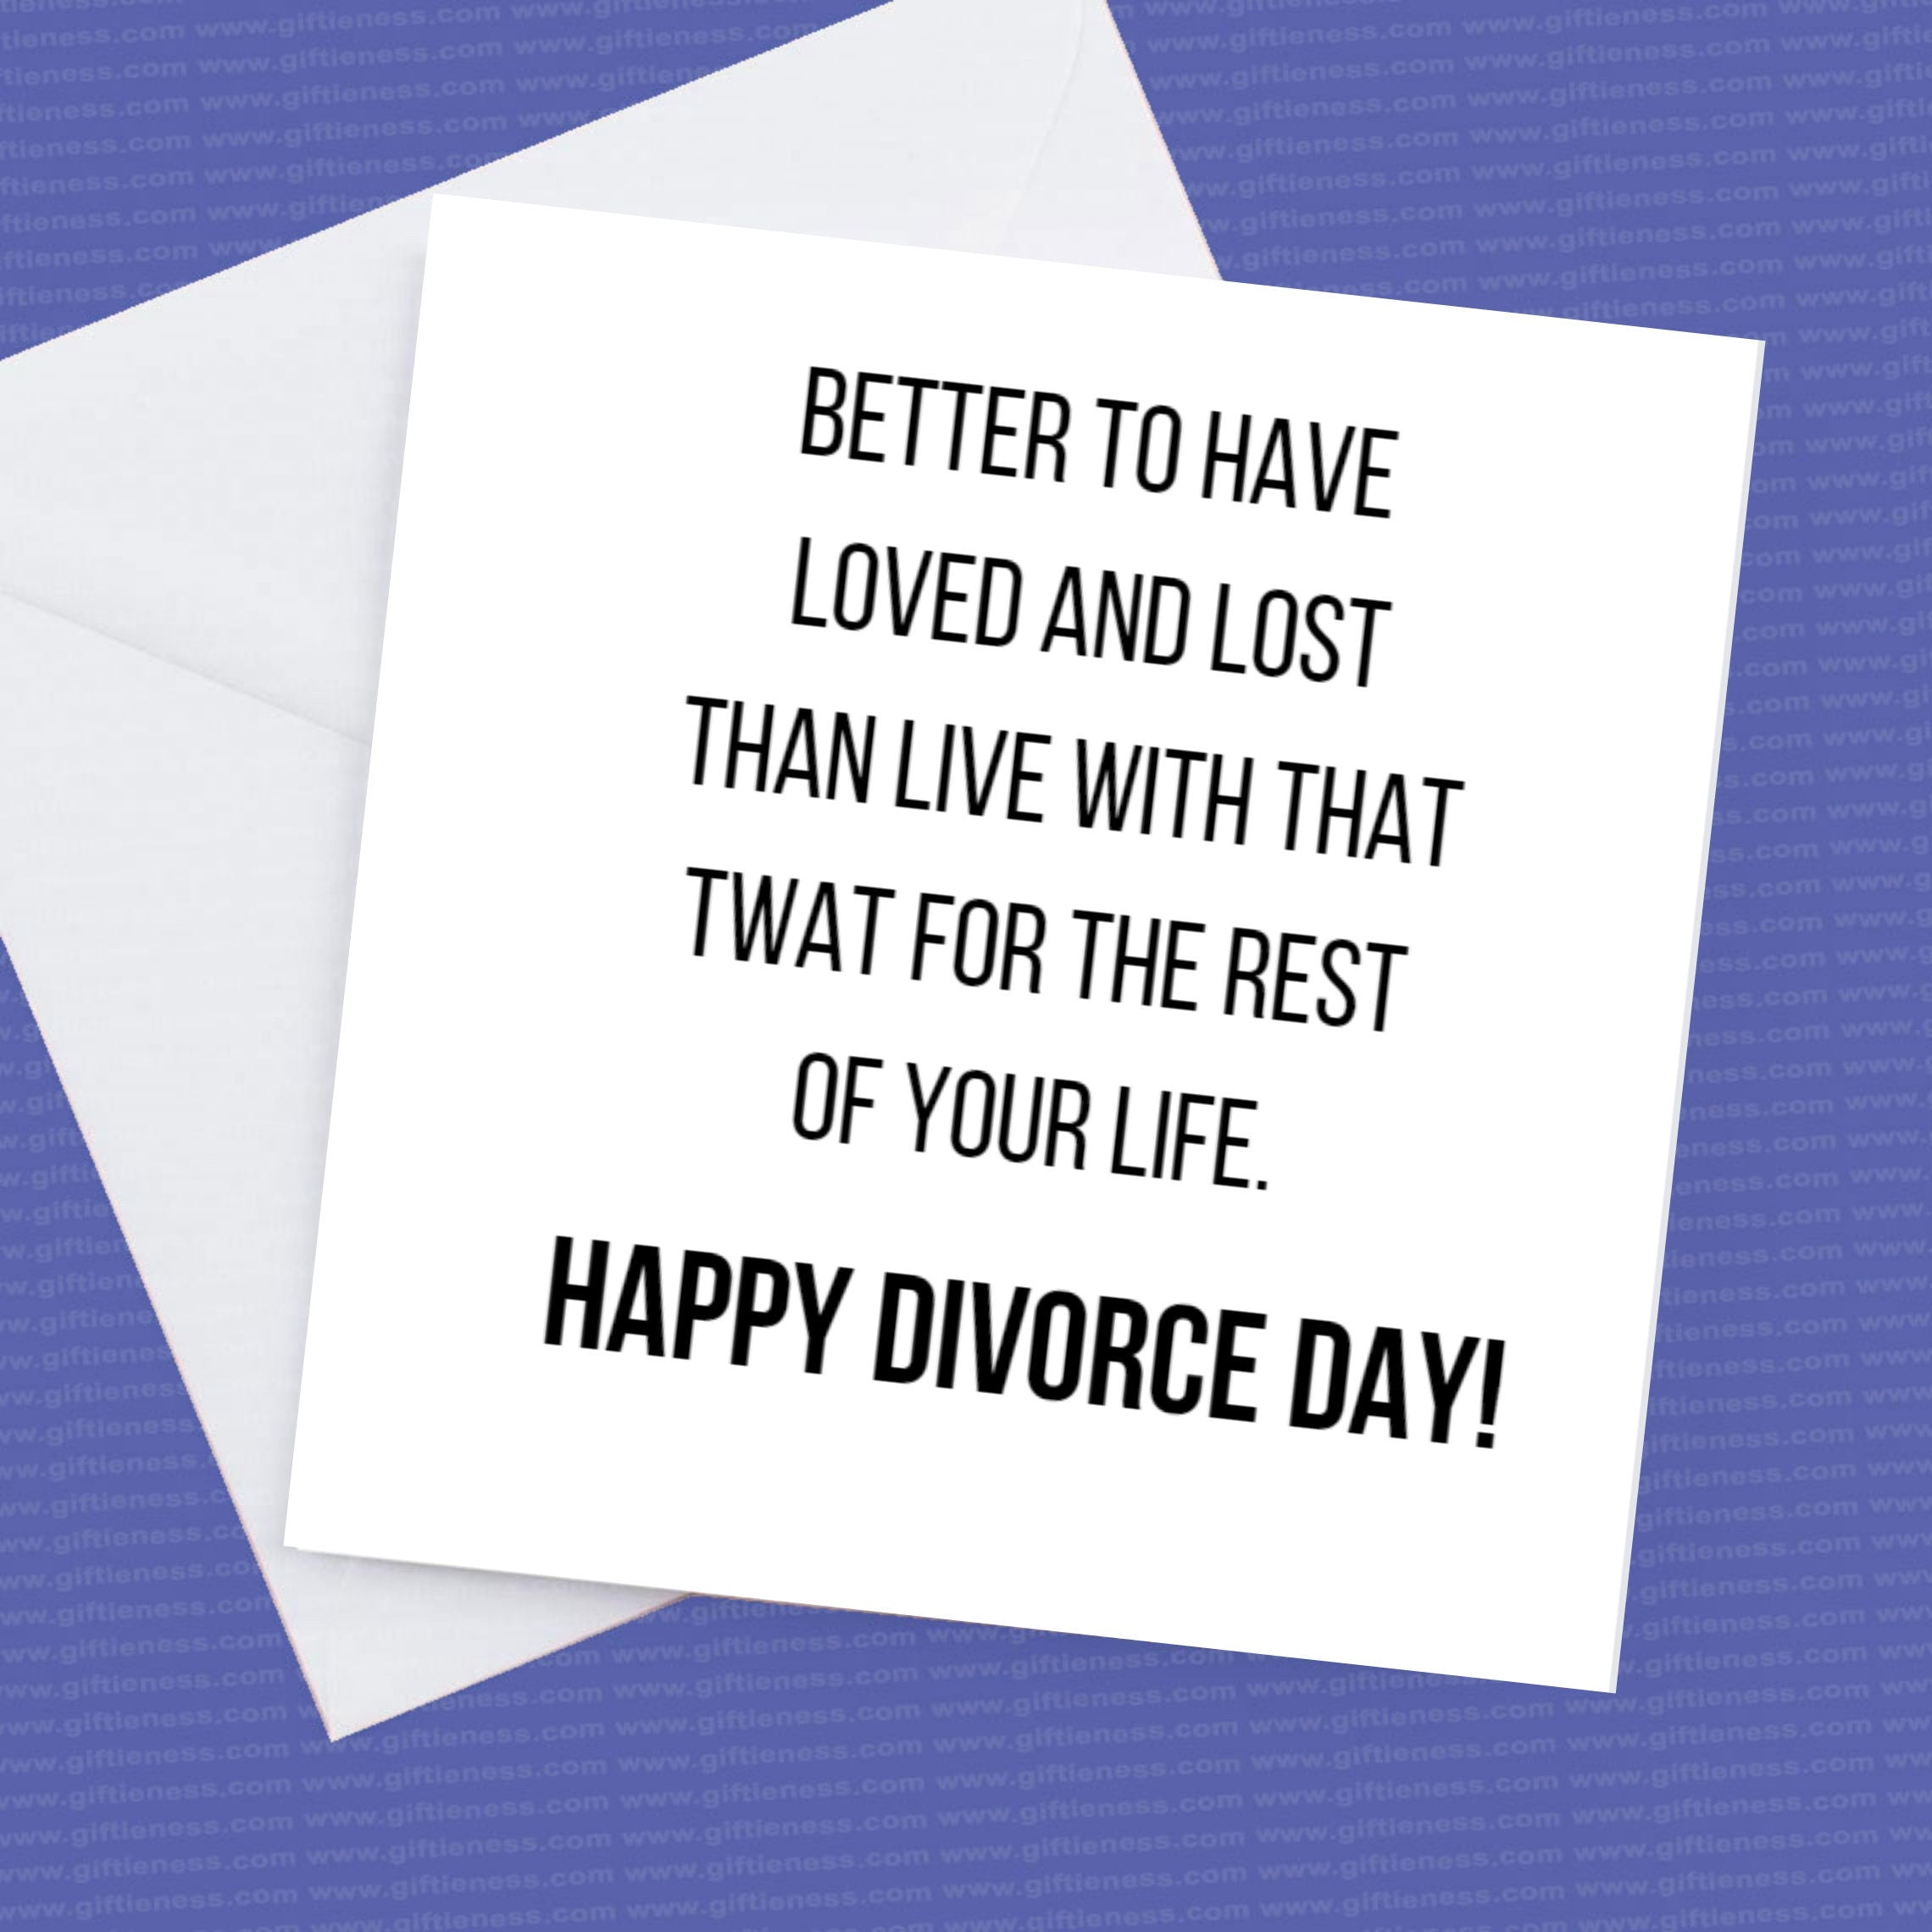 Divorce Day Card, Better to have loved and lost than stay with that tw.t